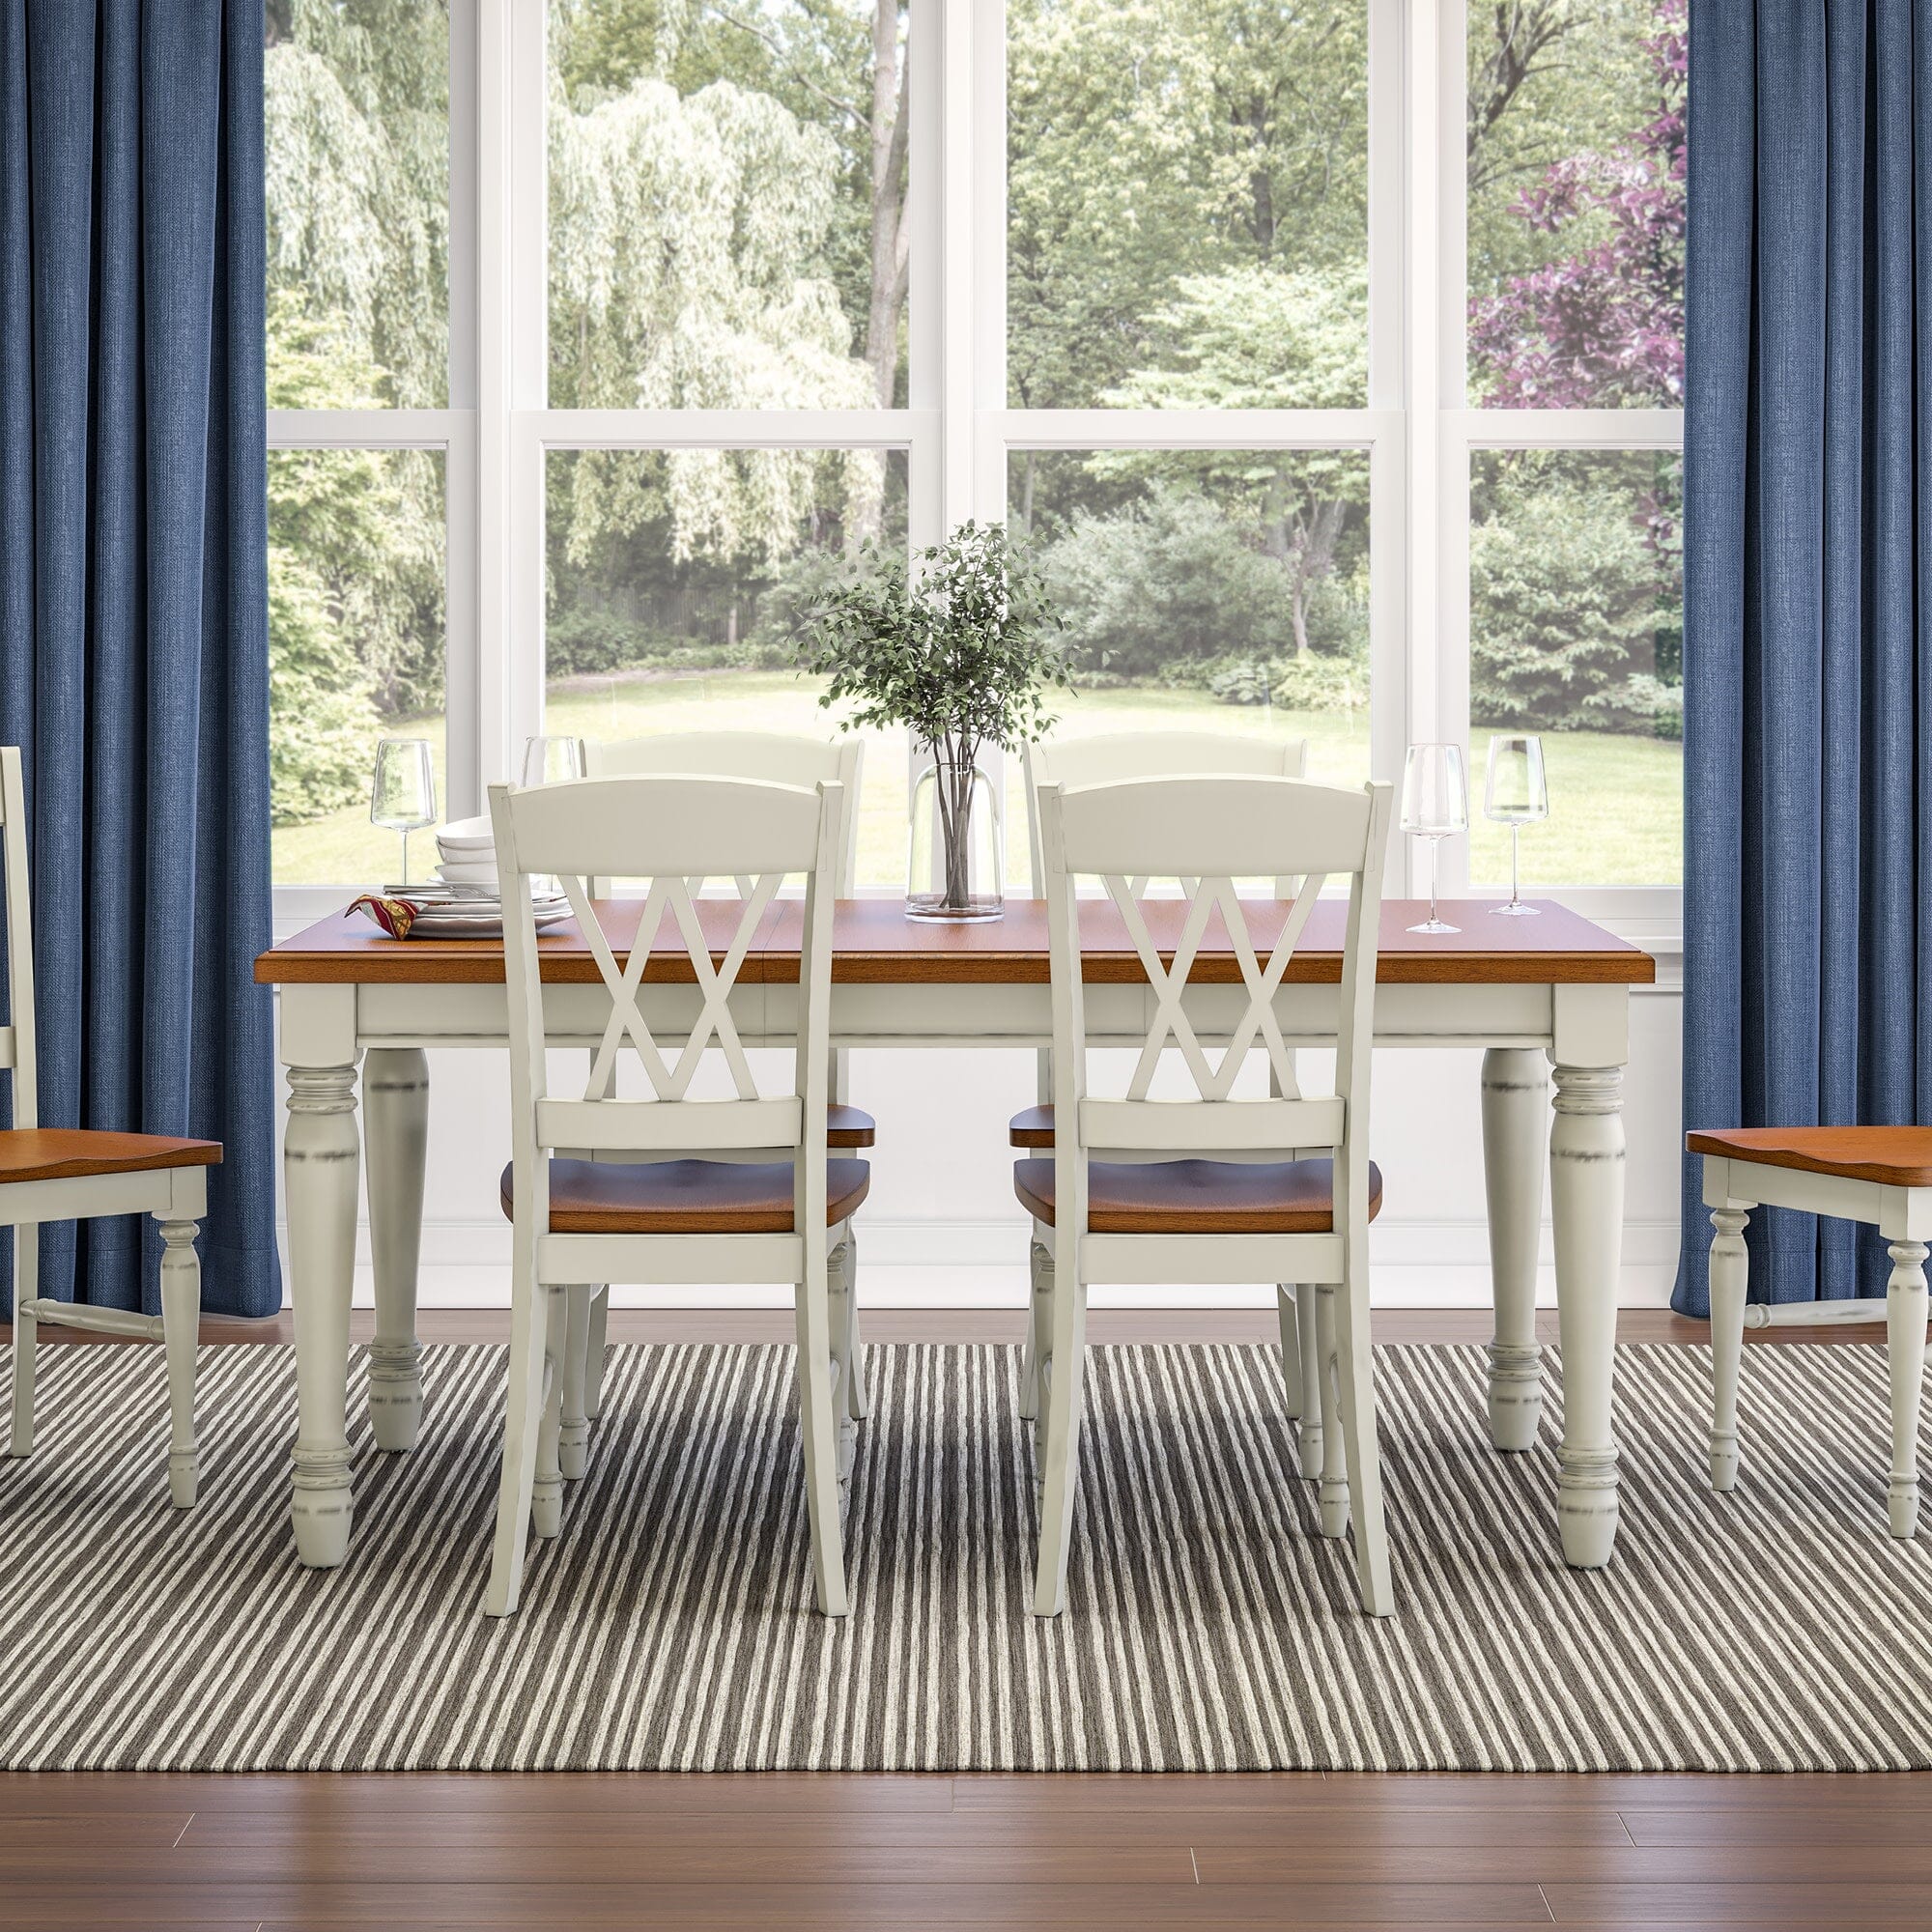 Traditional Dining Table By Monarch Dining Table Monarch